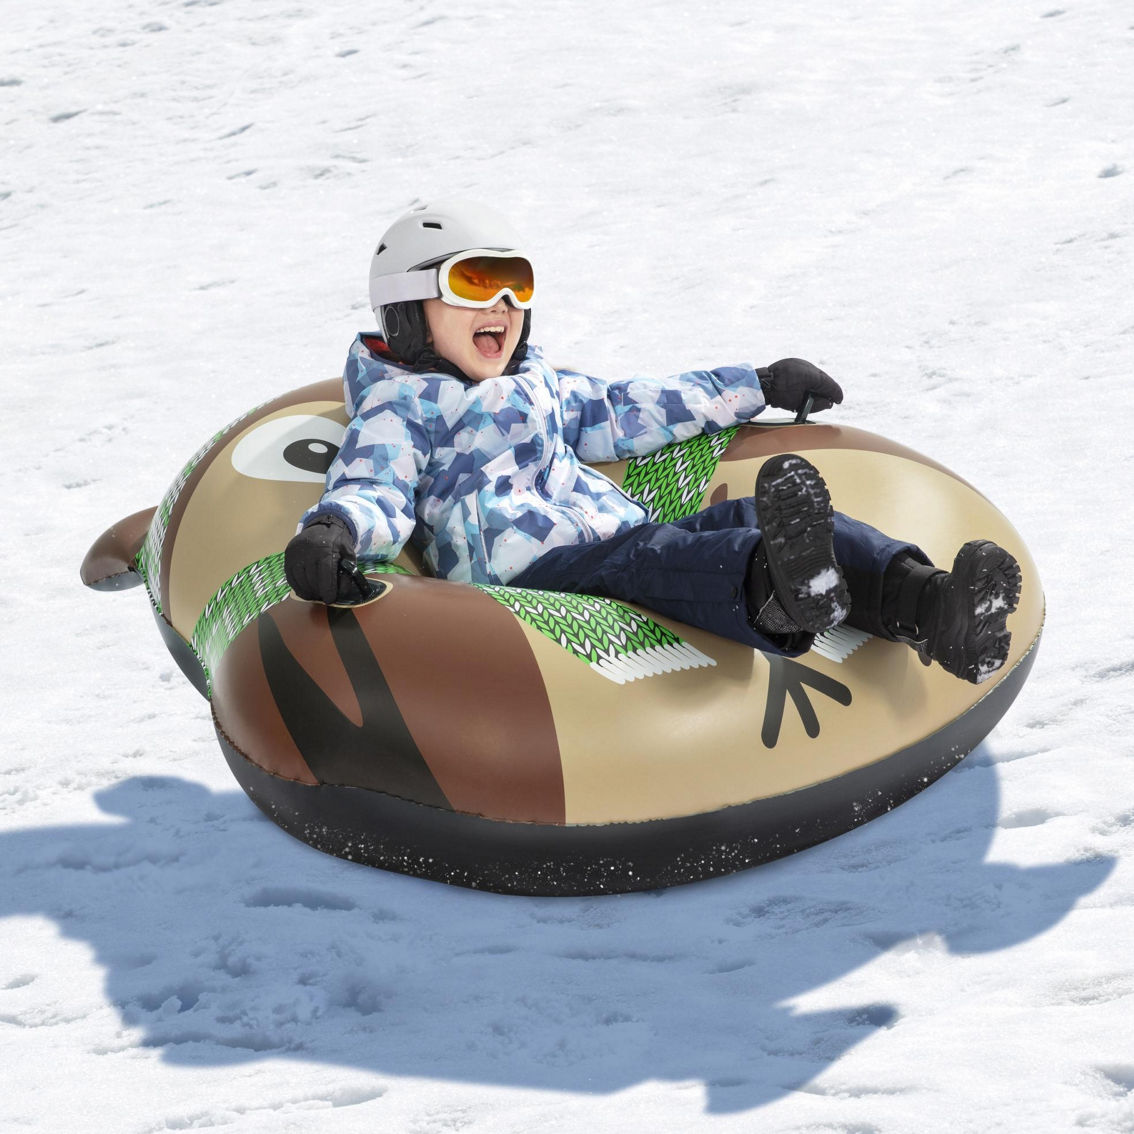 Bestway H2oGo Snow Oakley The Owl Snow Tube - Image 3 of 6